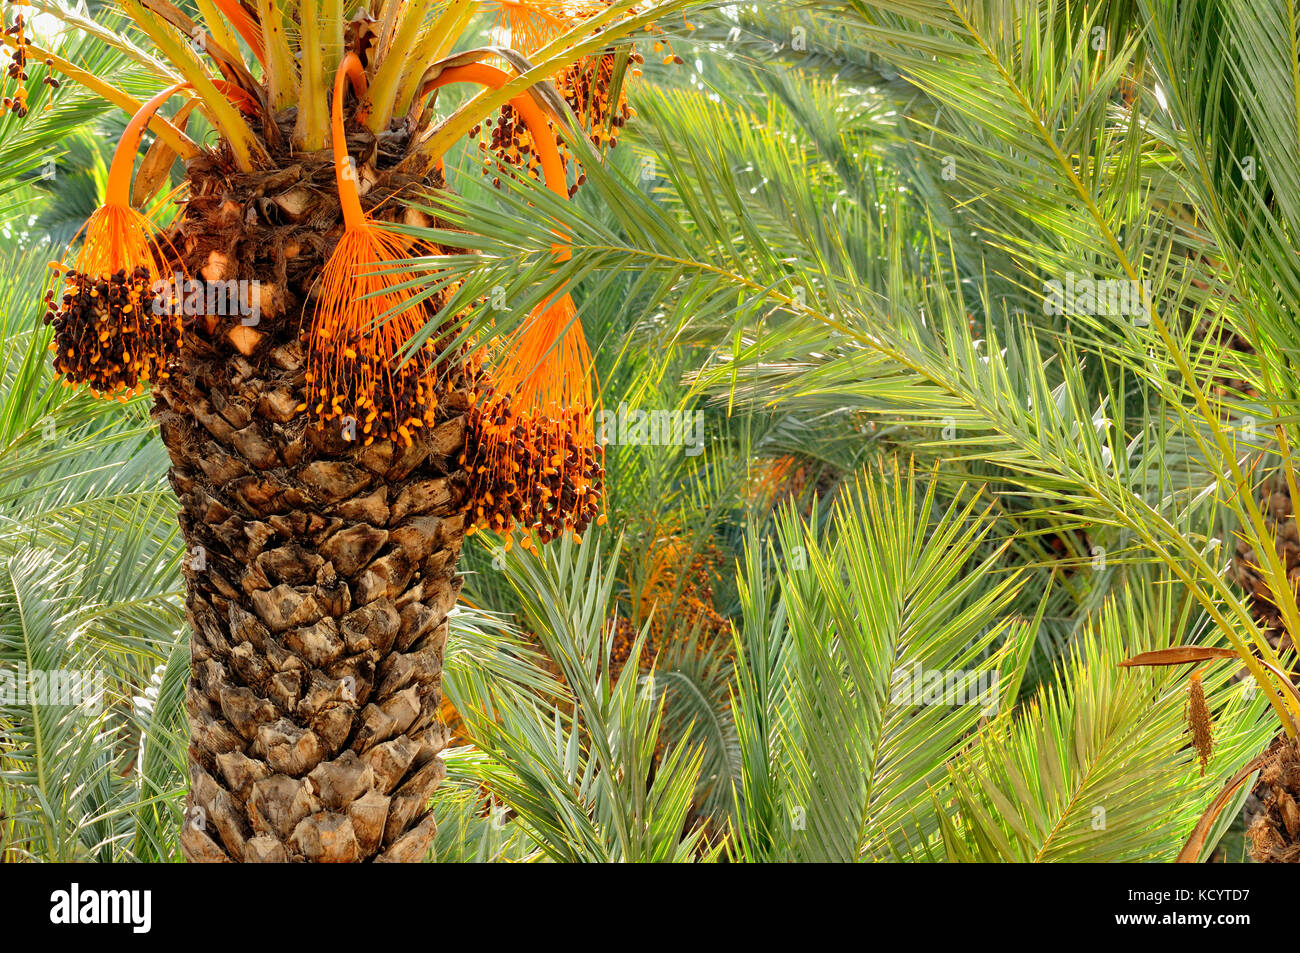 Date palm (Phoenix dactylifera) in the palm forest known as El Palmeral. Elche, Alicante, Spain Stock Photo